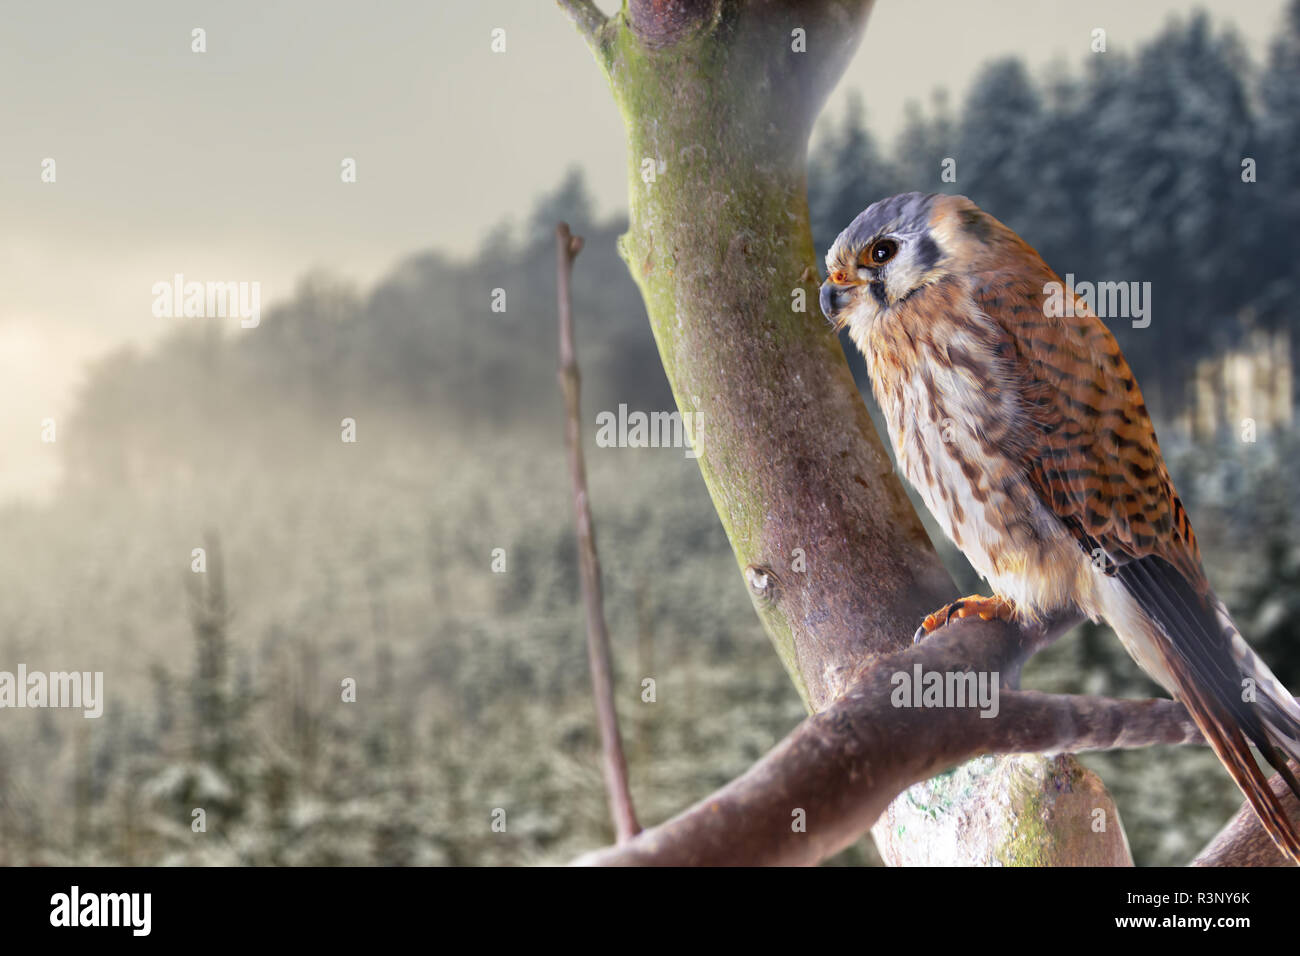 A young bird of the genus Hawk is sitting on a tree in front of a winter forest. Nice winter atmosphere with snowdrifts. Stock Photo